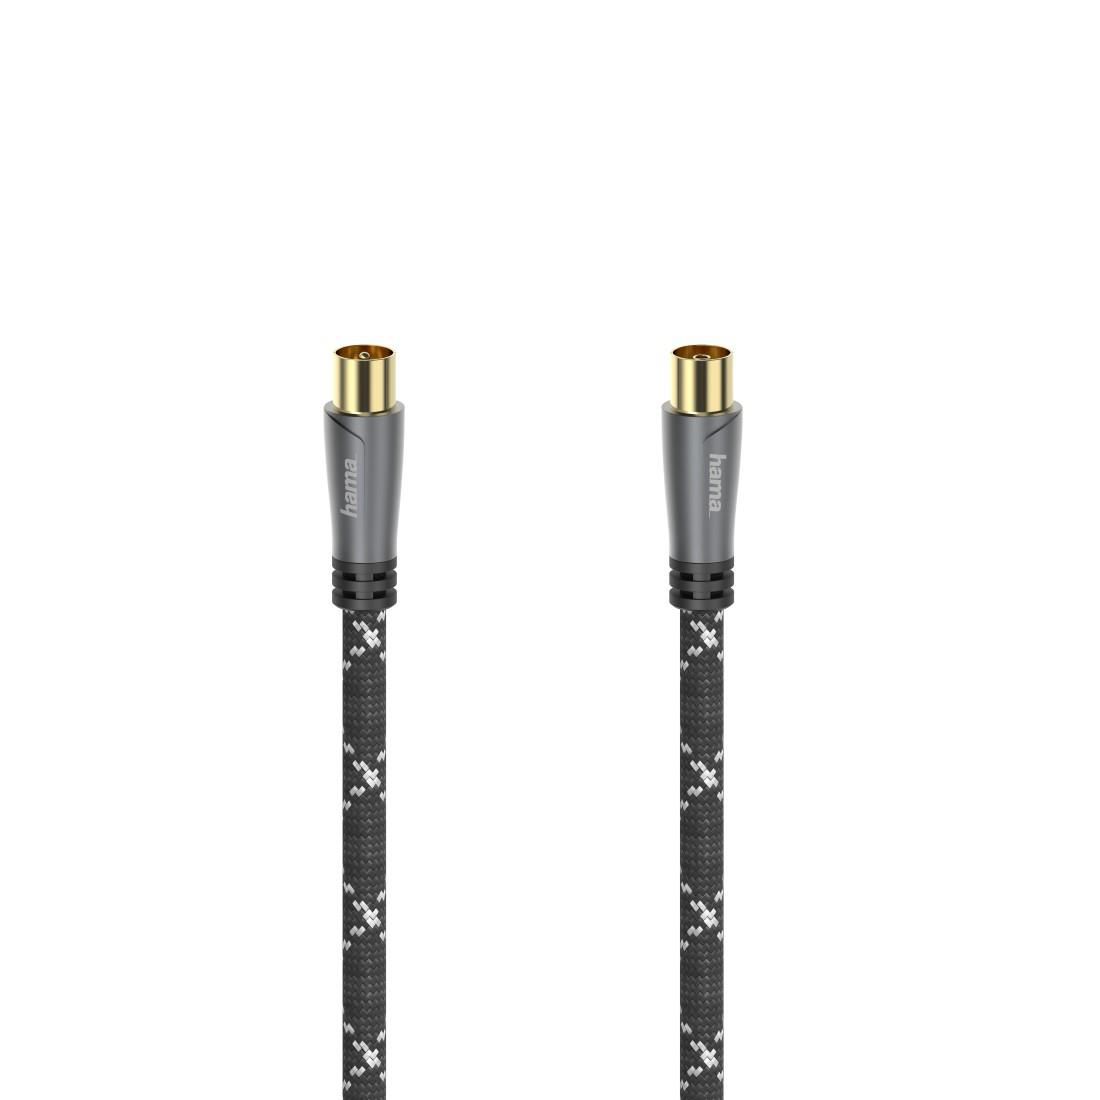 Hama 205073 W128824539 3 Coaxial Cable 10 M Black, 